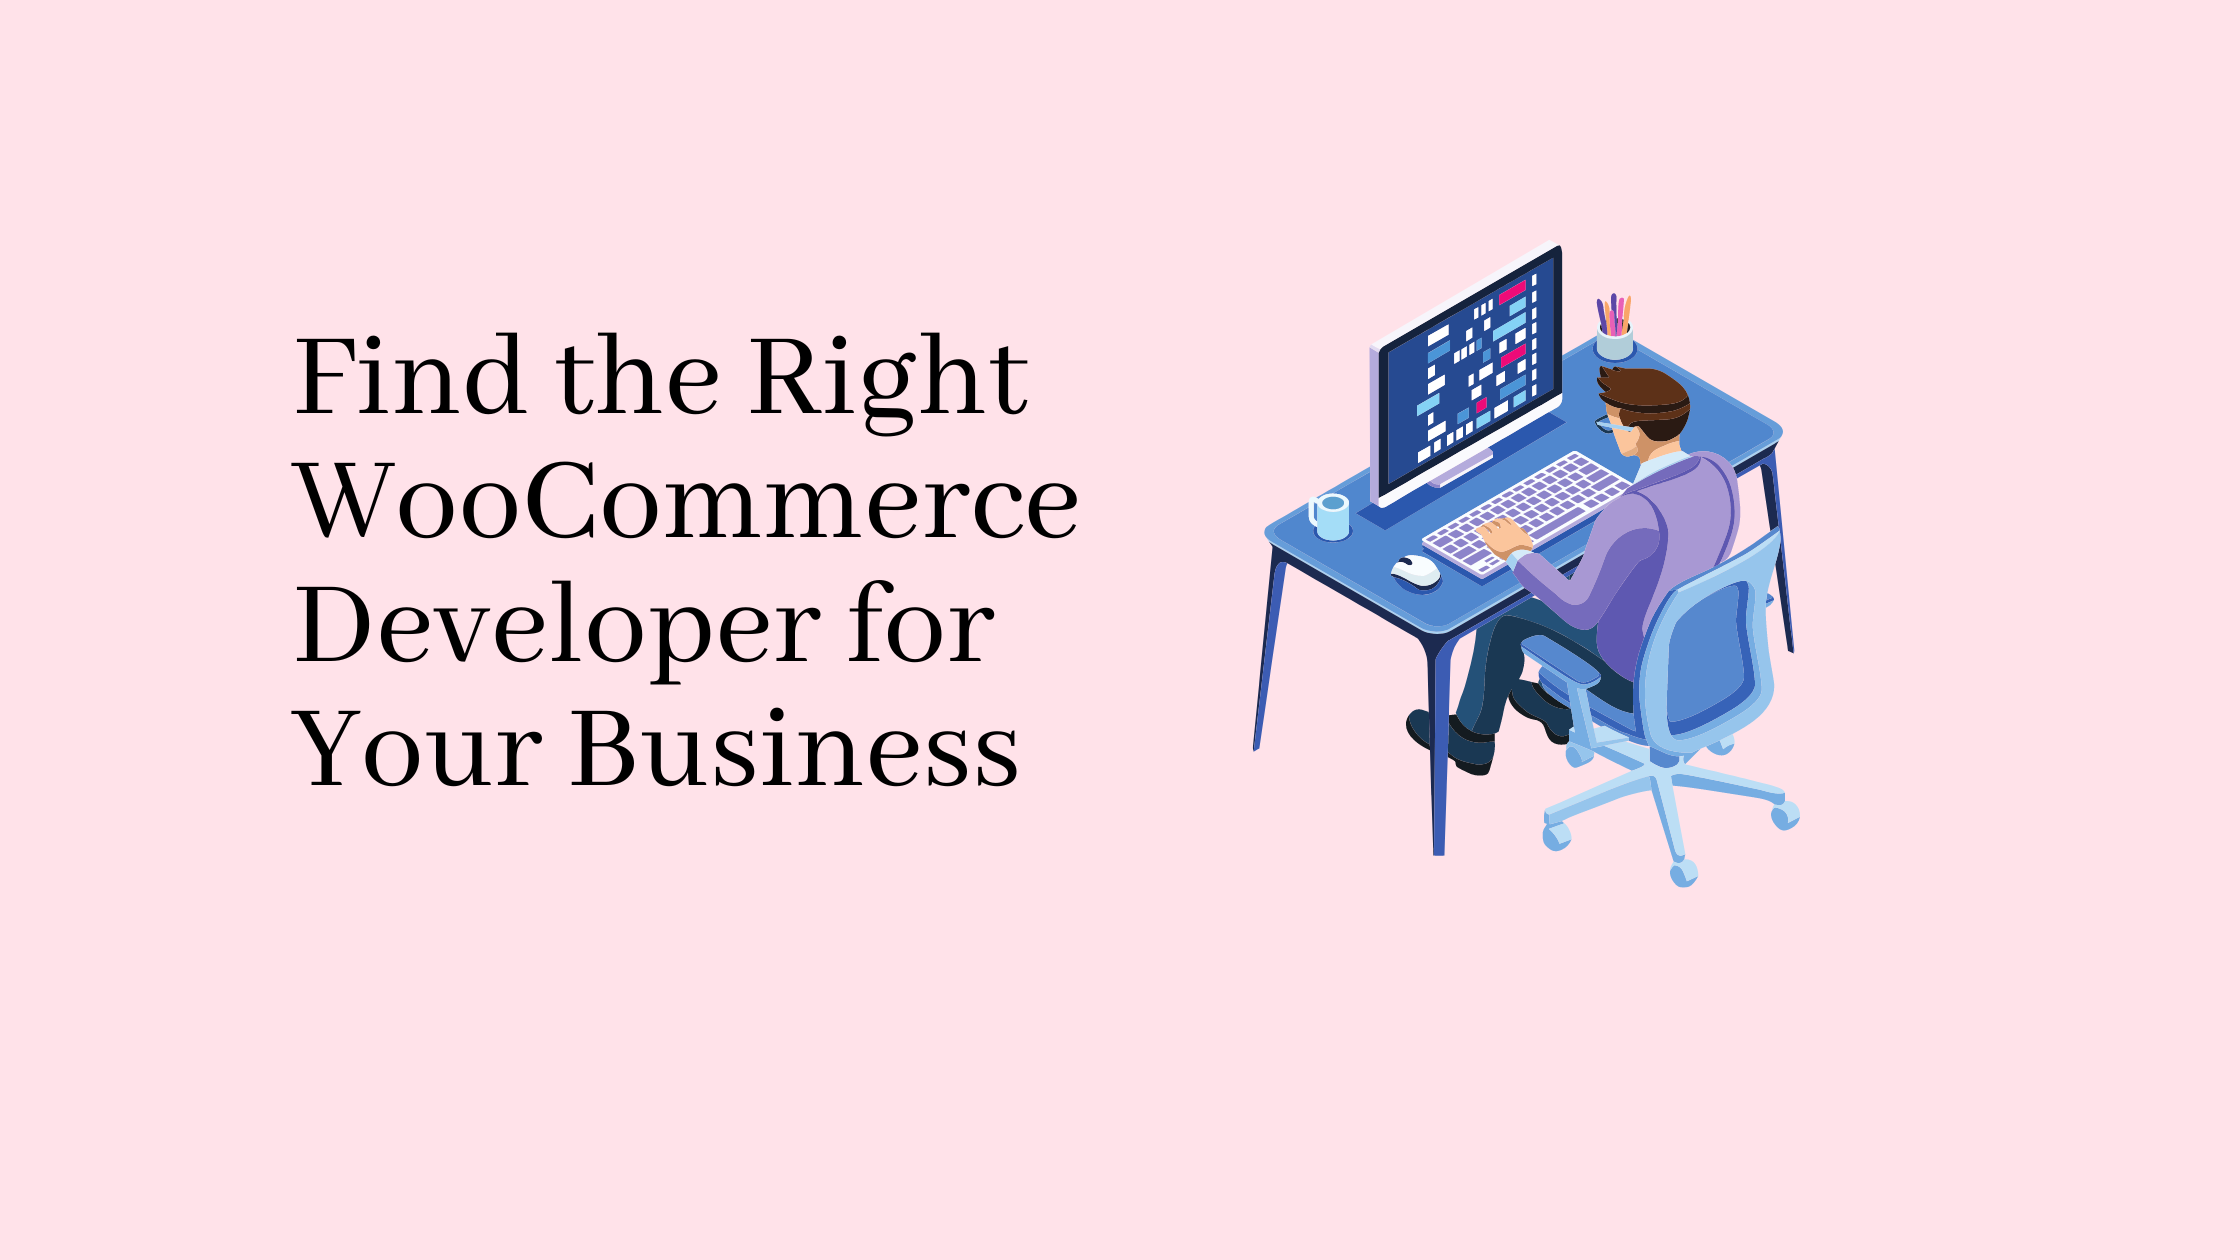 Find the Right WooCommerce Developer for Your Business